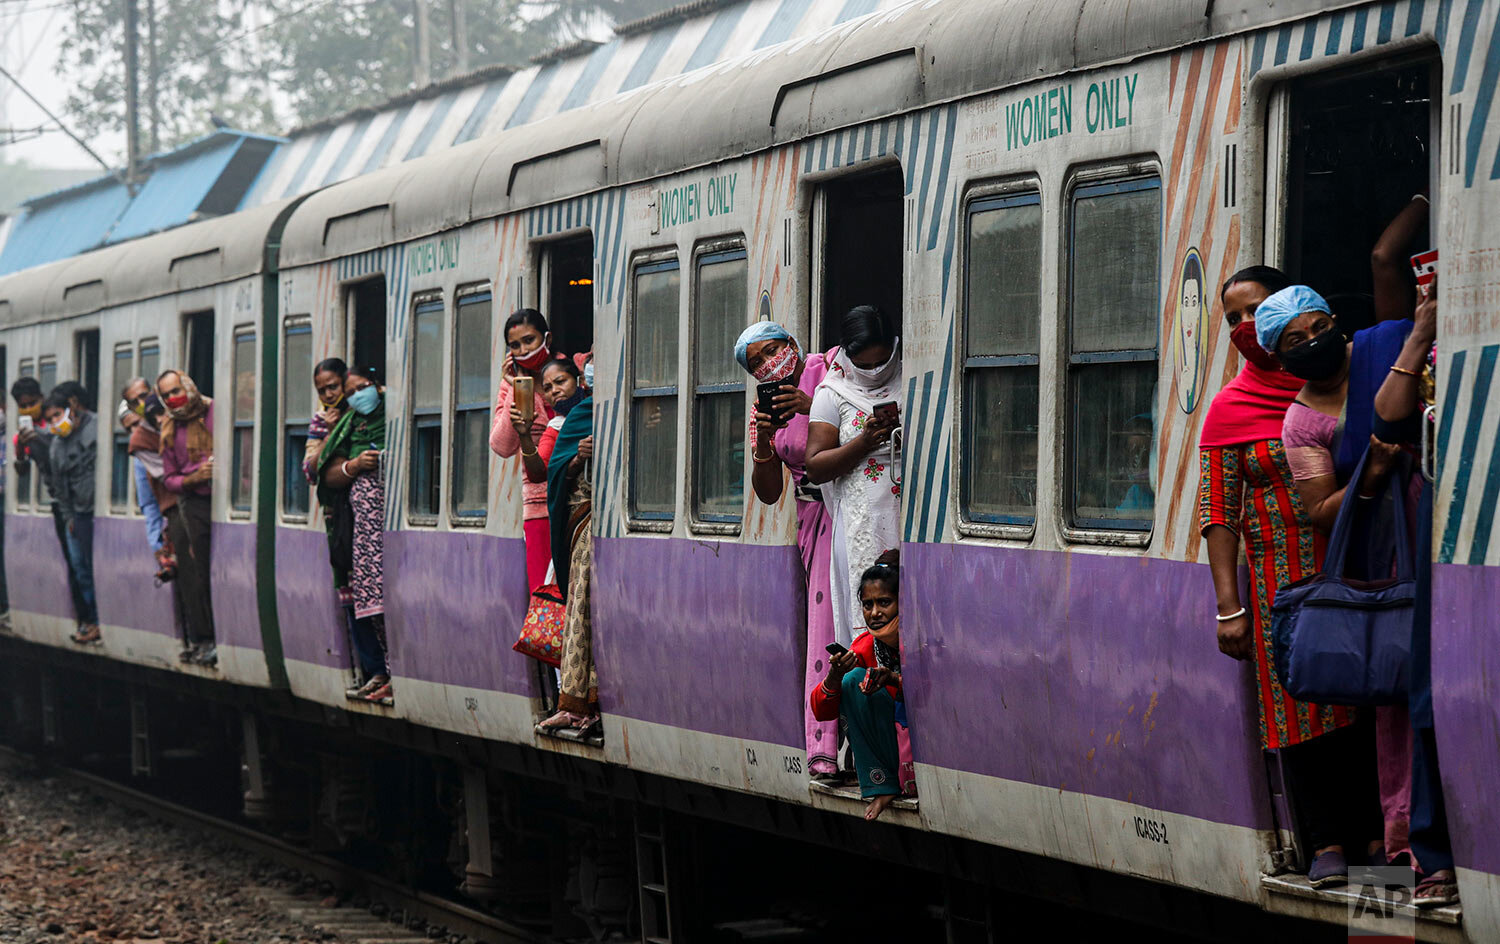  Stranded commuters of a local train look out as supporters of left parties block a train track during a nationwide shutdown called by thousands of Indian farmers protesting new agriculture laws, in Kolkata, India, Tuesday, Dec. 8, 2020.  (AP Photo/B